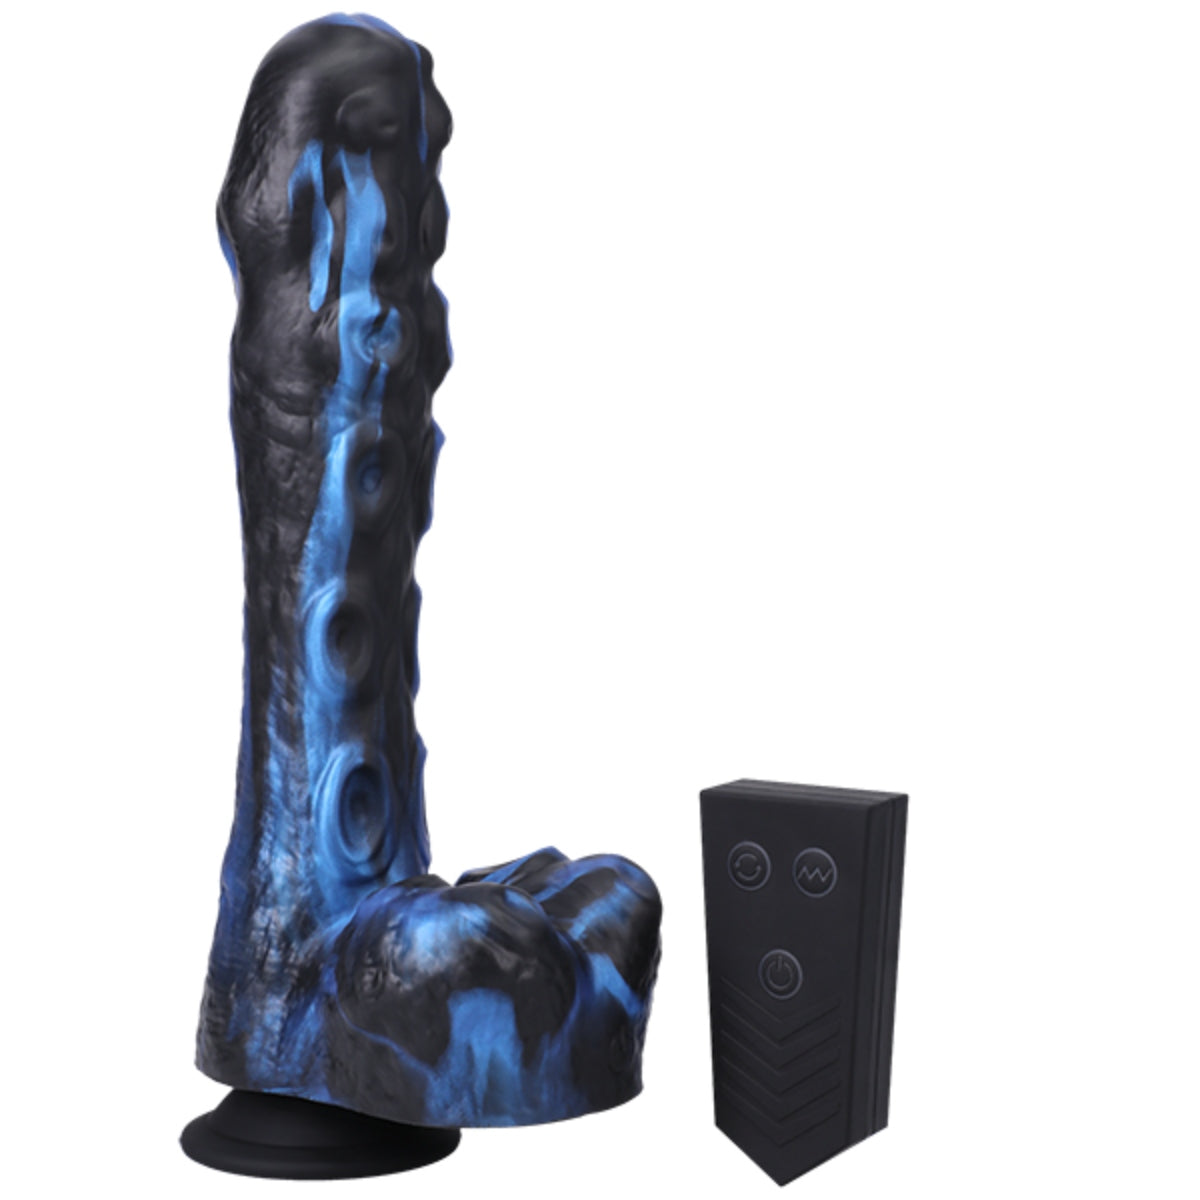 Fort Troff Tendril Thruster Mini Fuck Machine Rechargeable Dildo with Remote Blue Black (8172332941551)